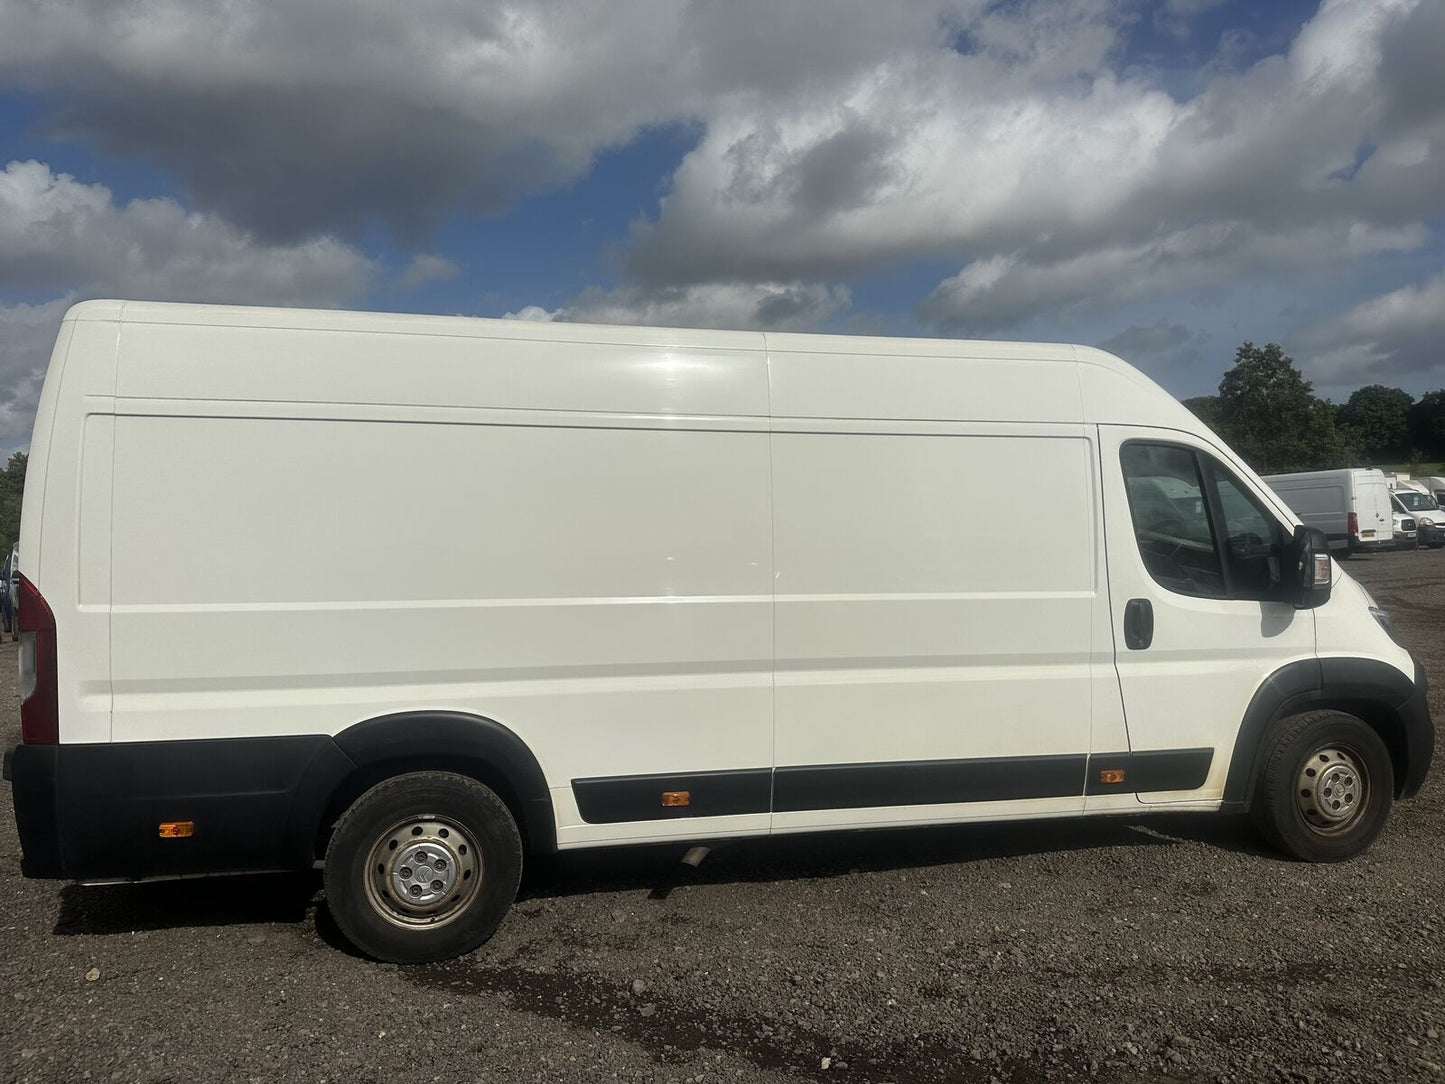 Bid on 2019 CITROEN RELAY 140PS CAMPER: WELL-MAINTAINED WORKHORSE- Buy &amp; Sell on Auction with EAMA Group